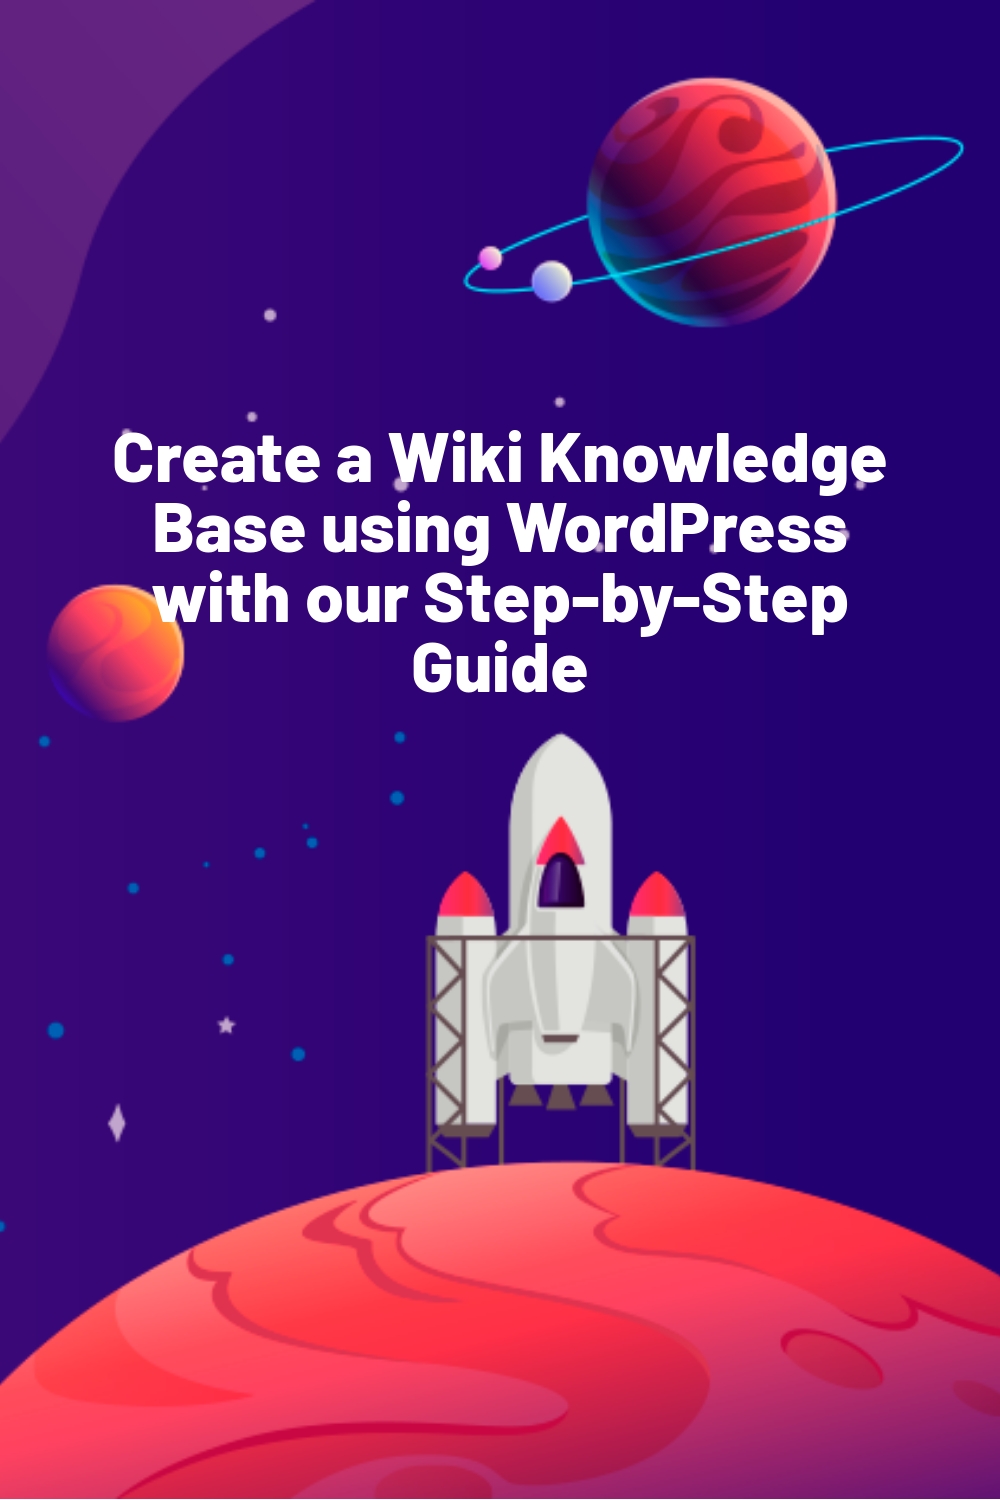 Create a Wiki Knowledge Base using WordPress with our Step-by-Step Guide